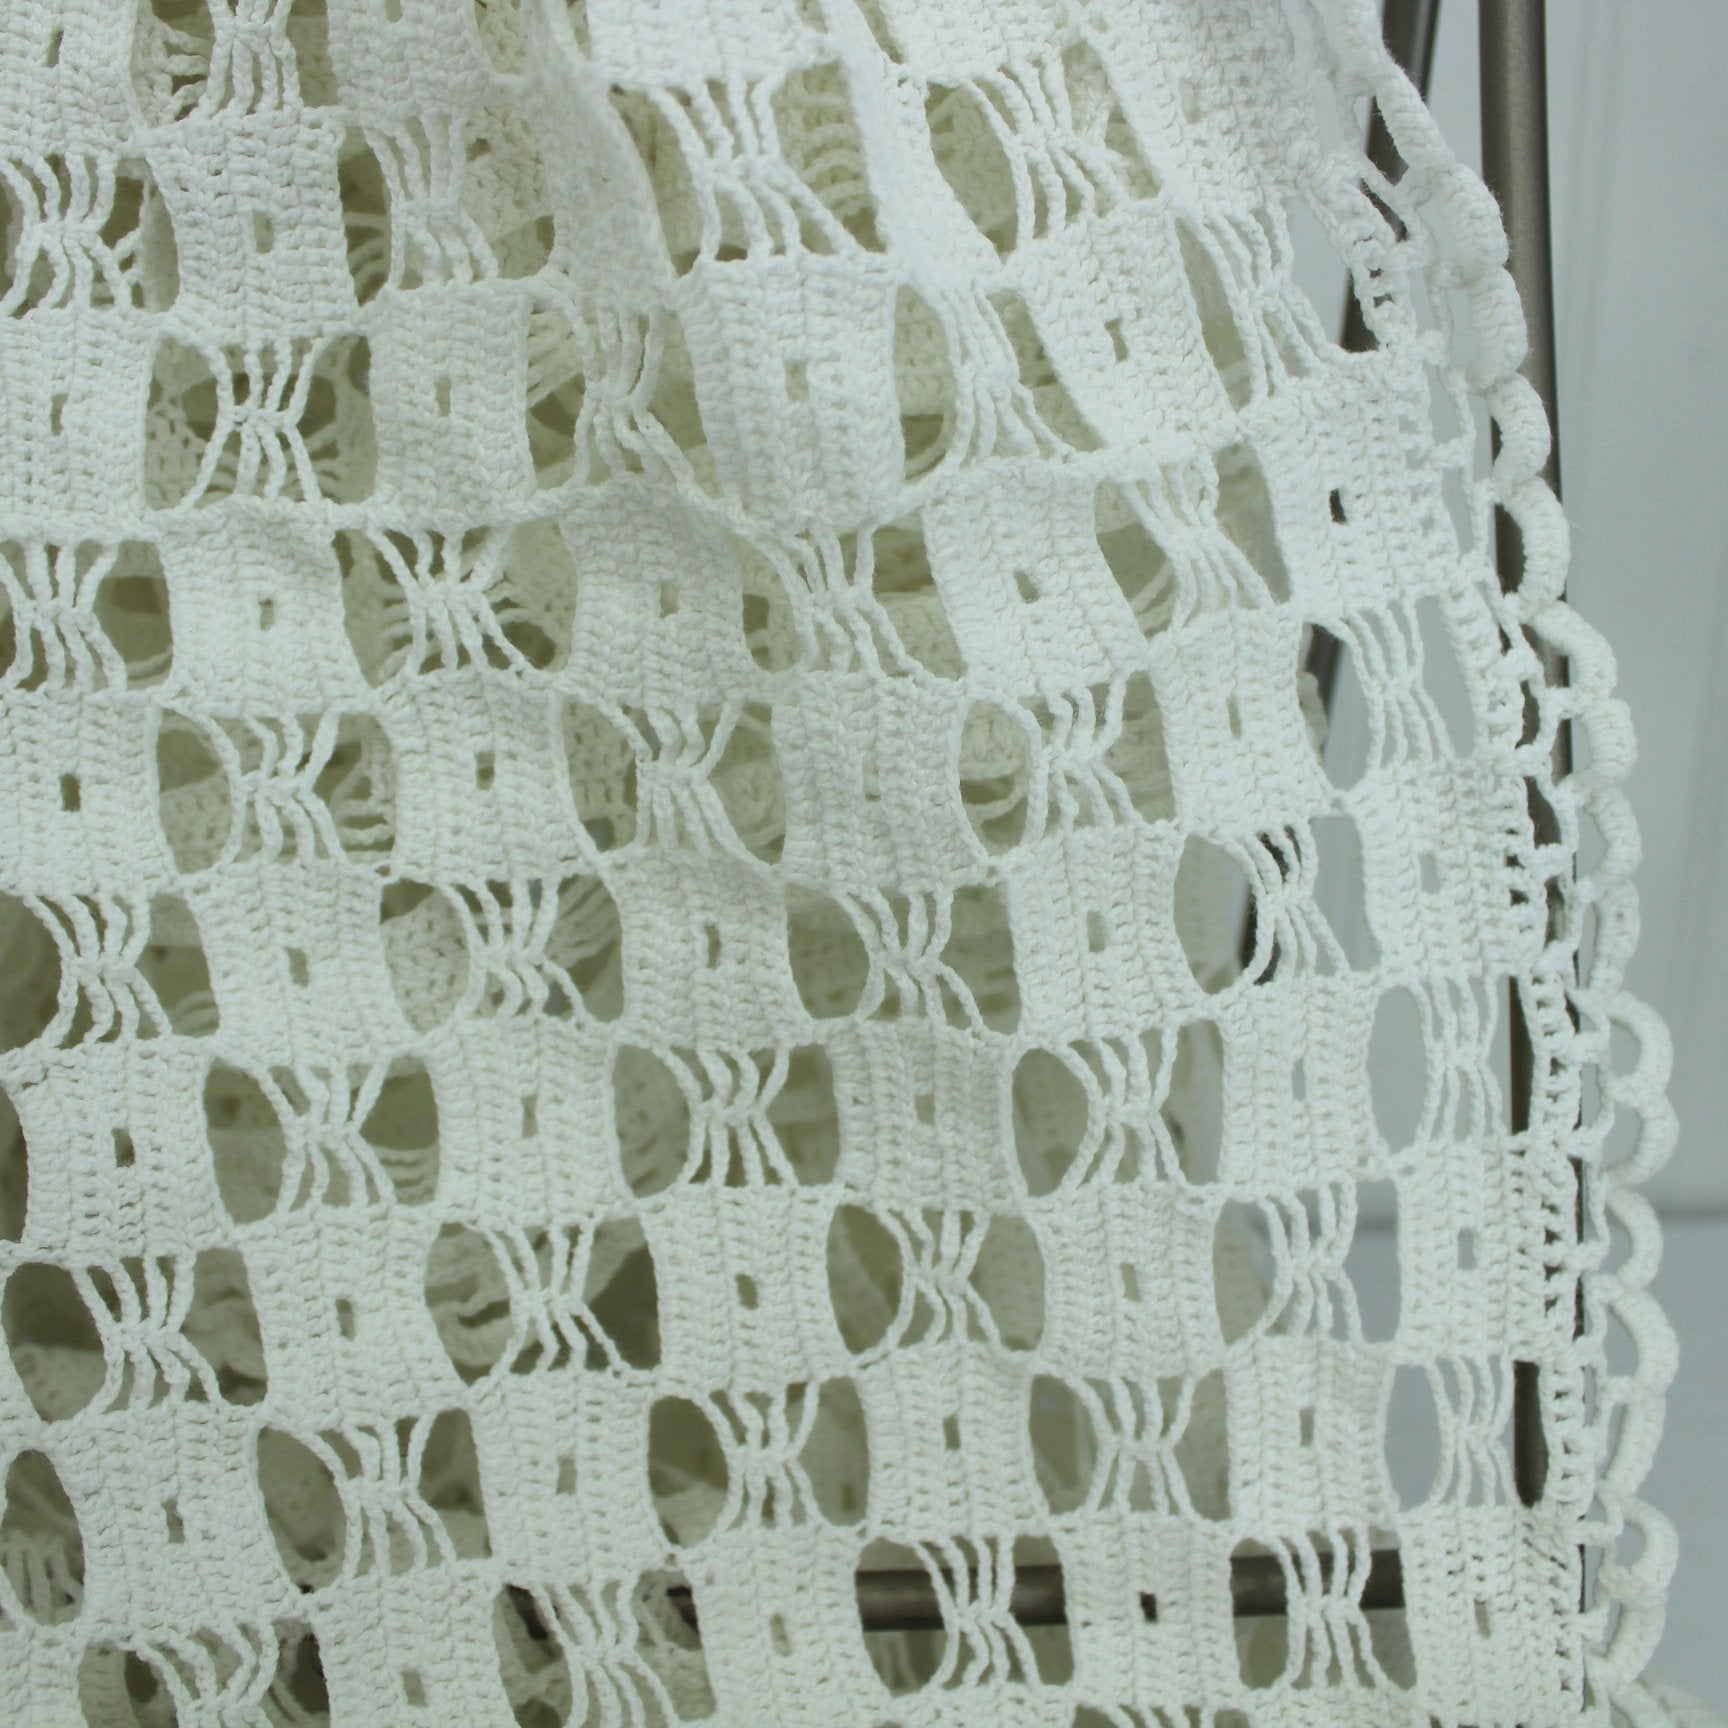 Crochet White Table Cloth Hand Made 75" X 90" view of cloth edge